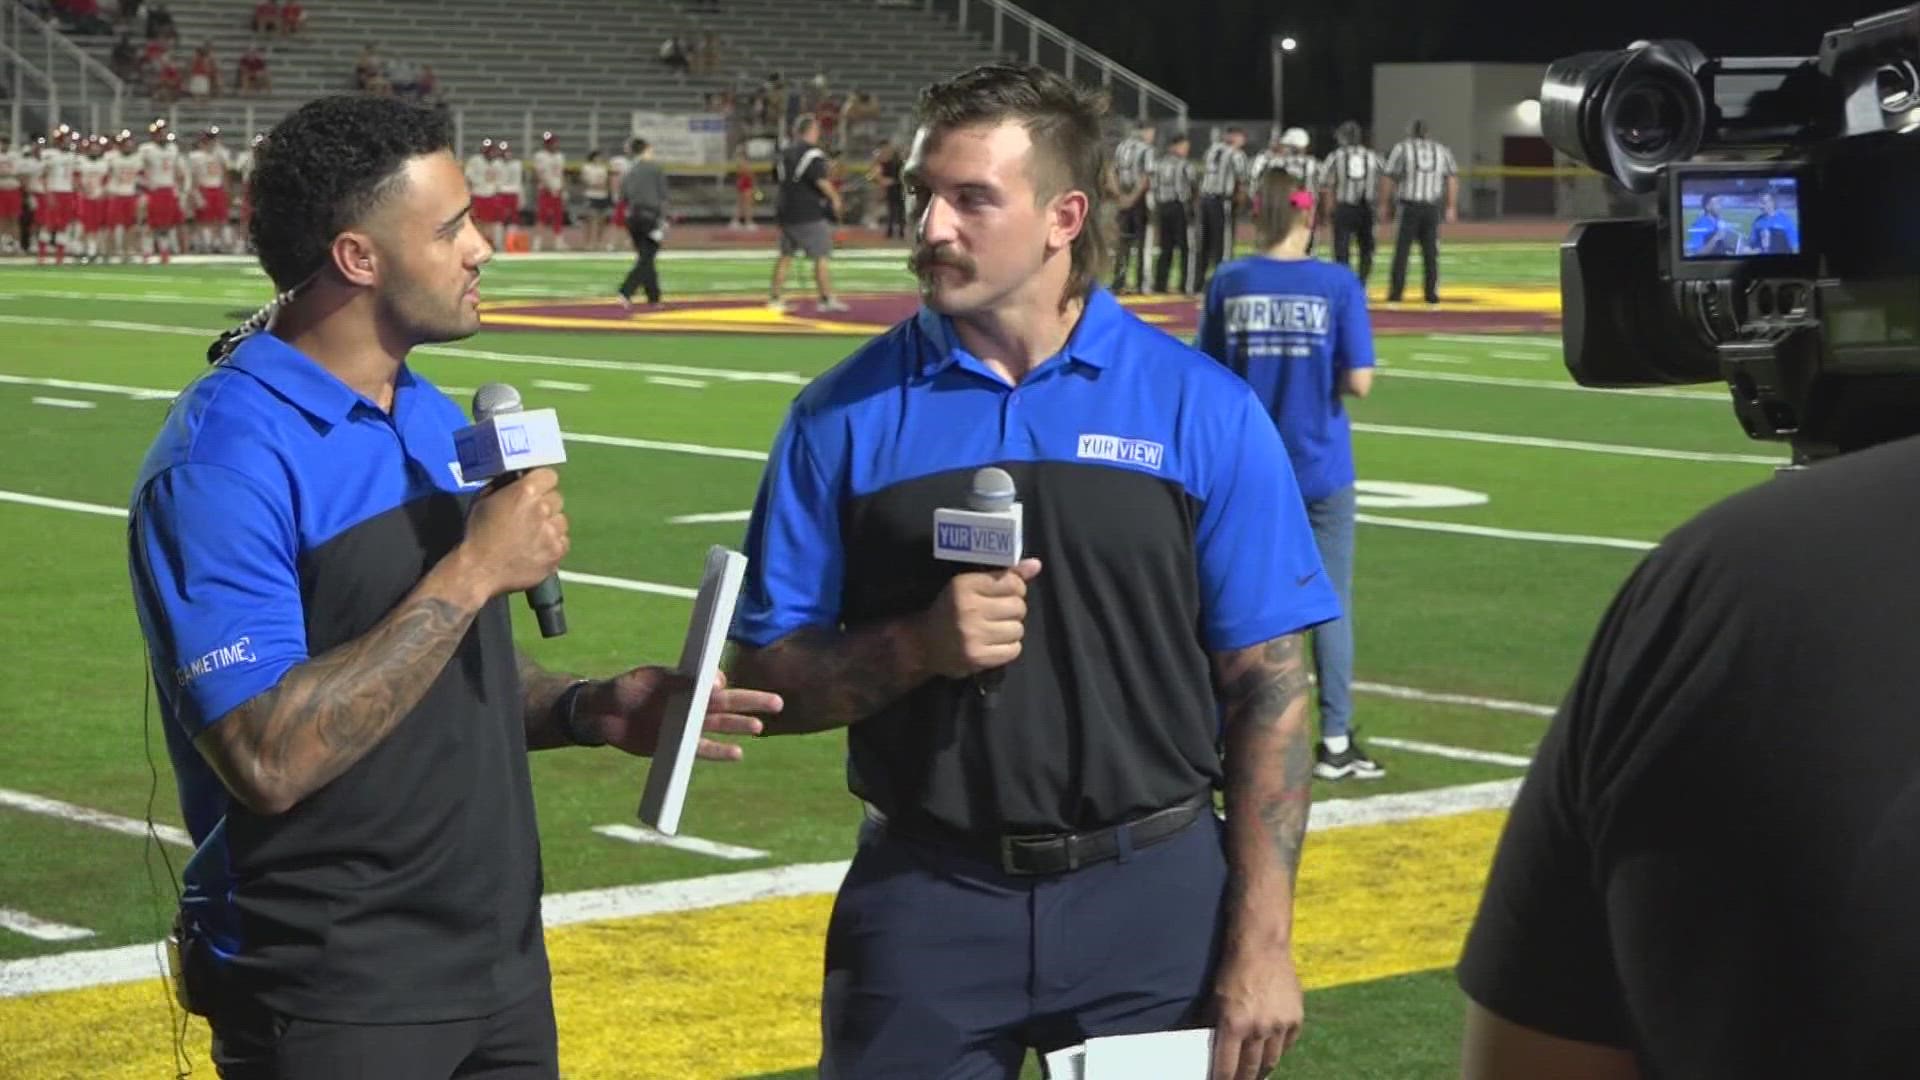 The ASU and UA football stars first made their marks on the grass at local Valley high schools. 12Sports talked with the two as they broadcasted a high school game.